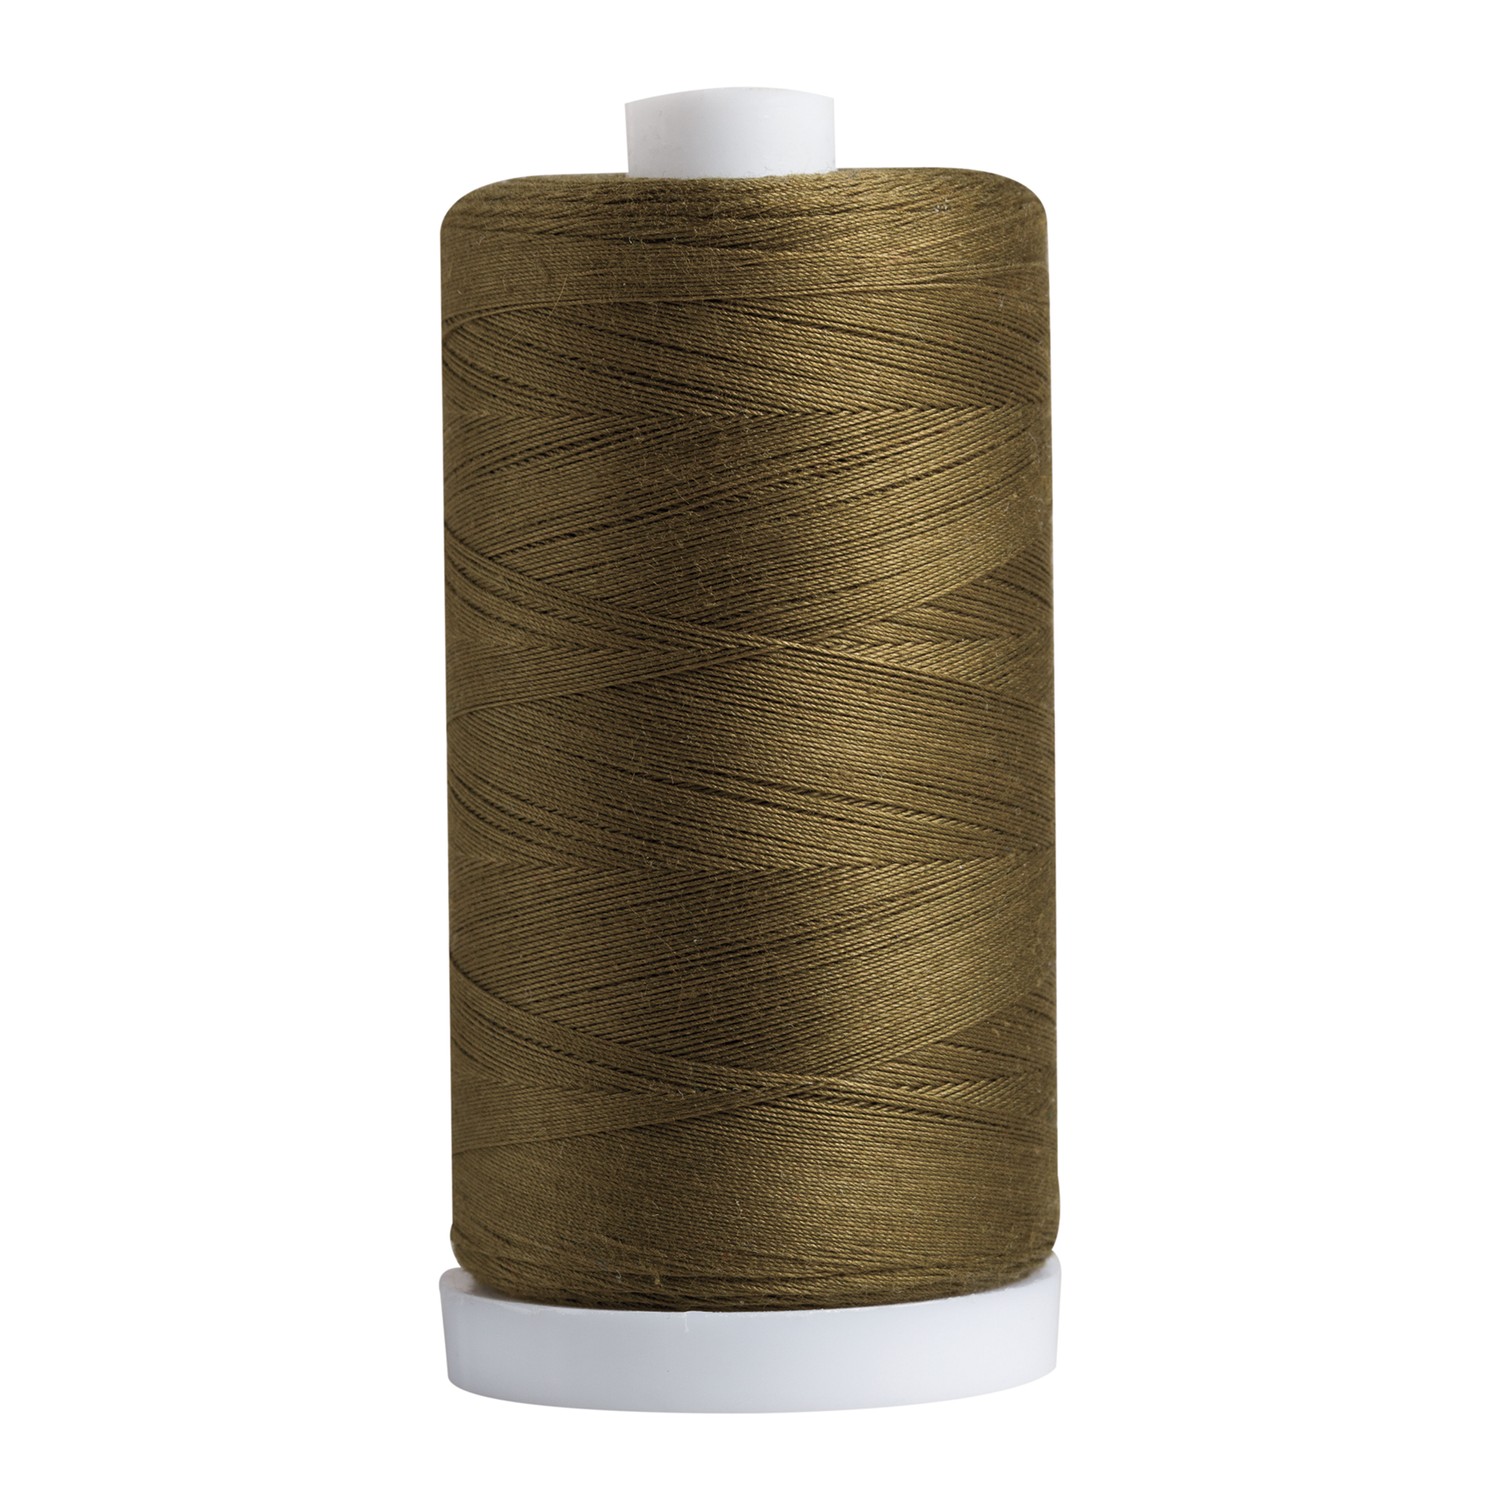  Connecting Threads 100% Cotton Essential Thread Set - 26 Spools  220 Yards Each with Carrier